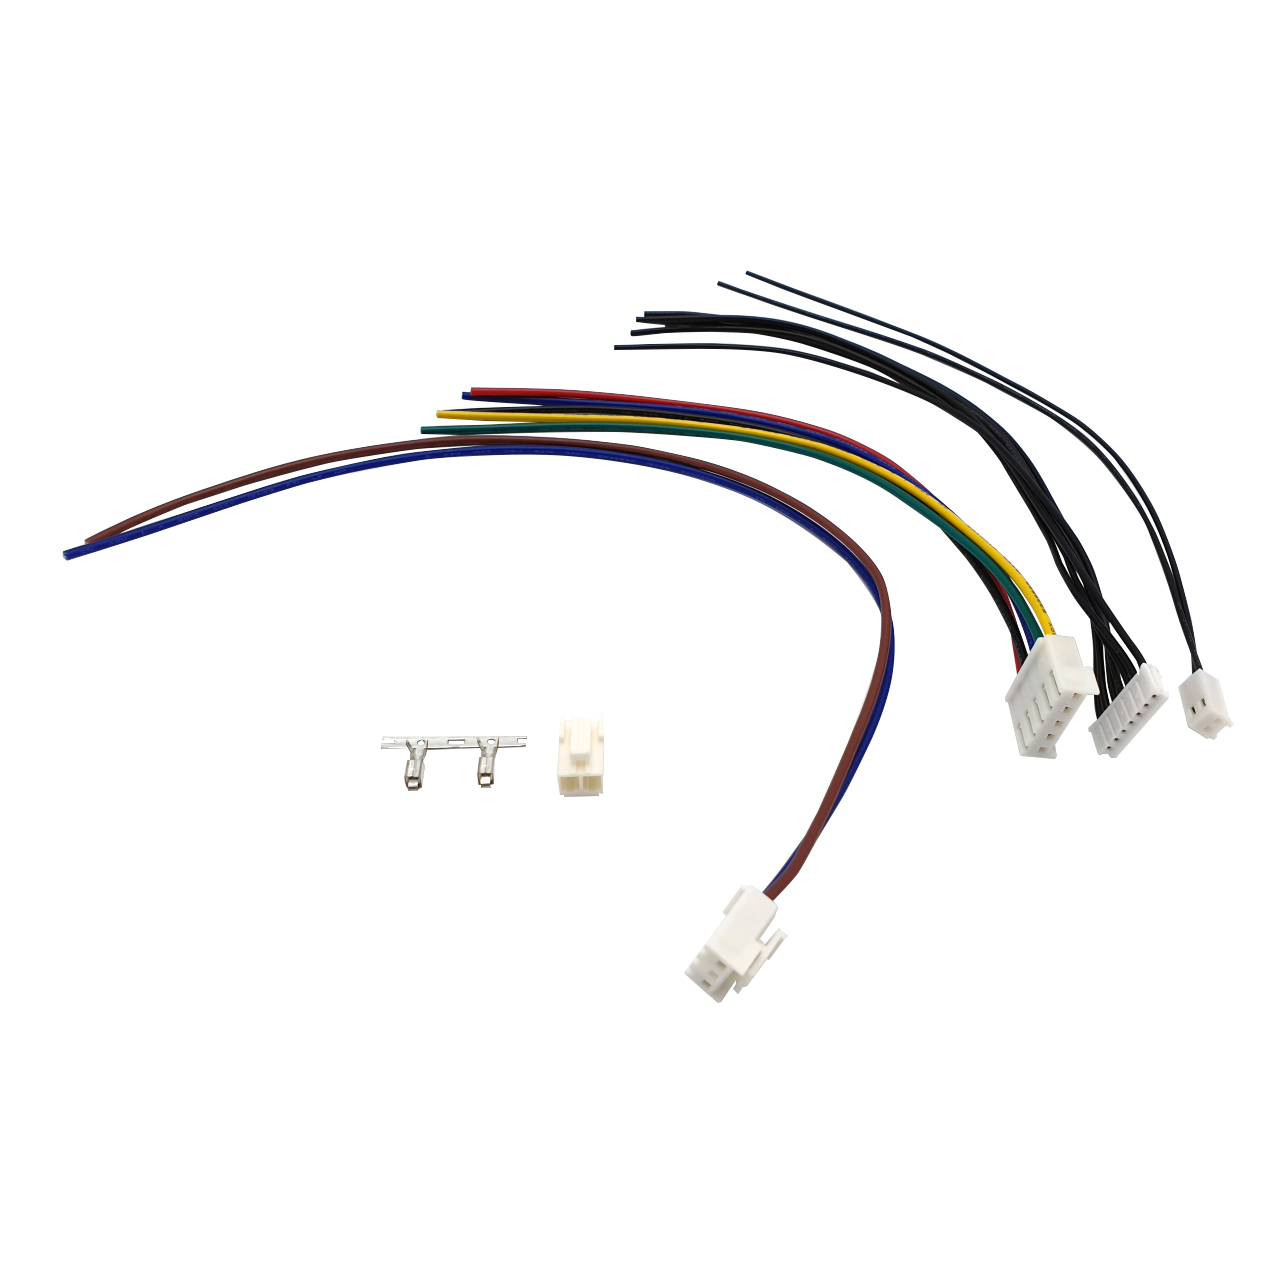 Cable set SMPS400